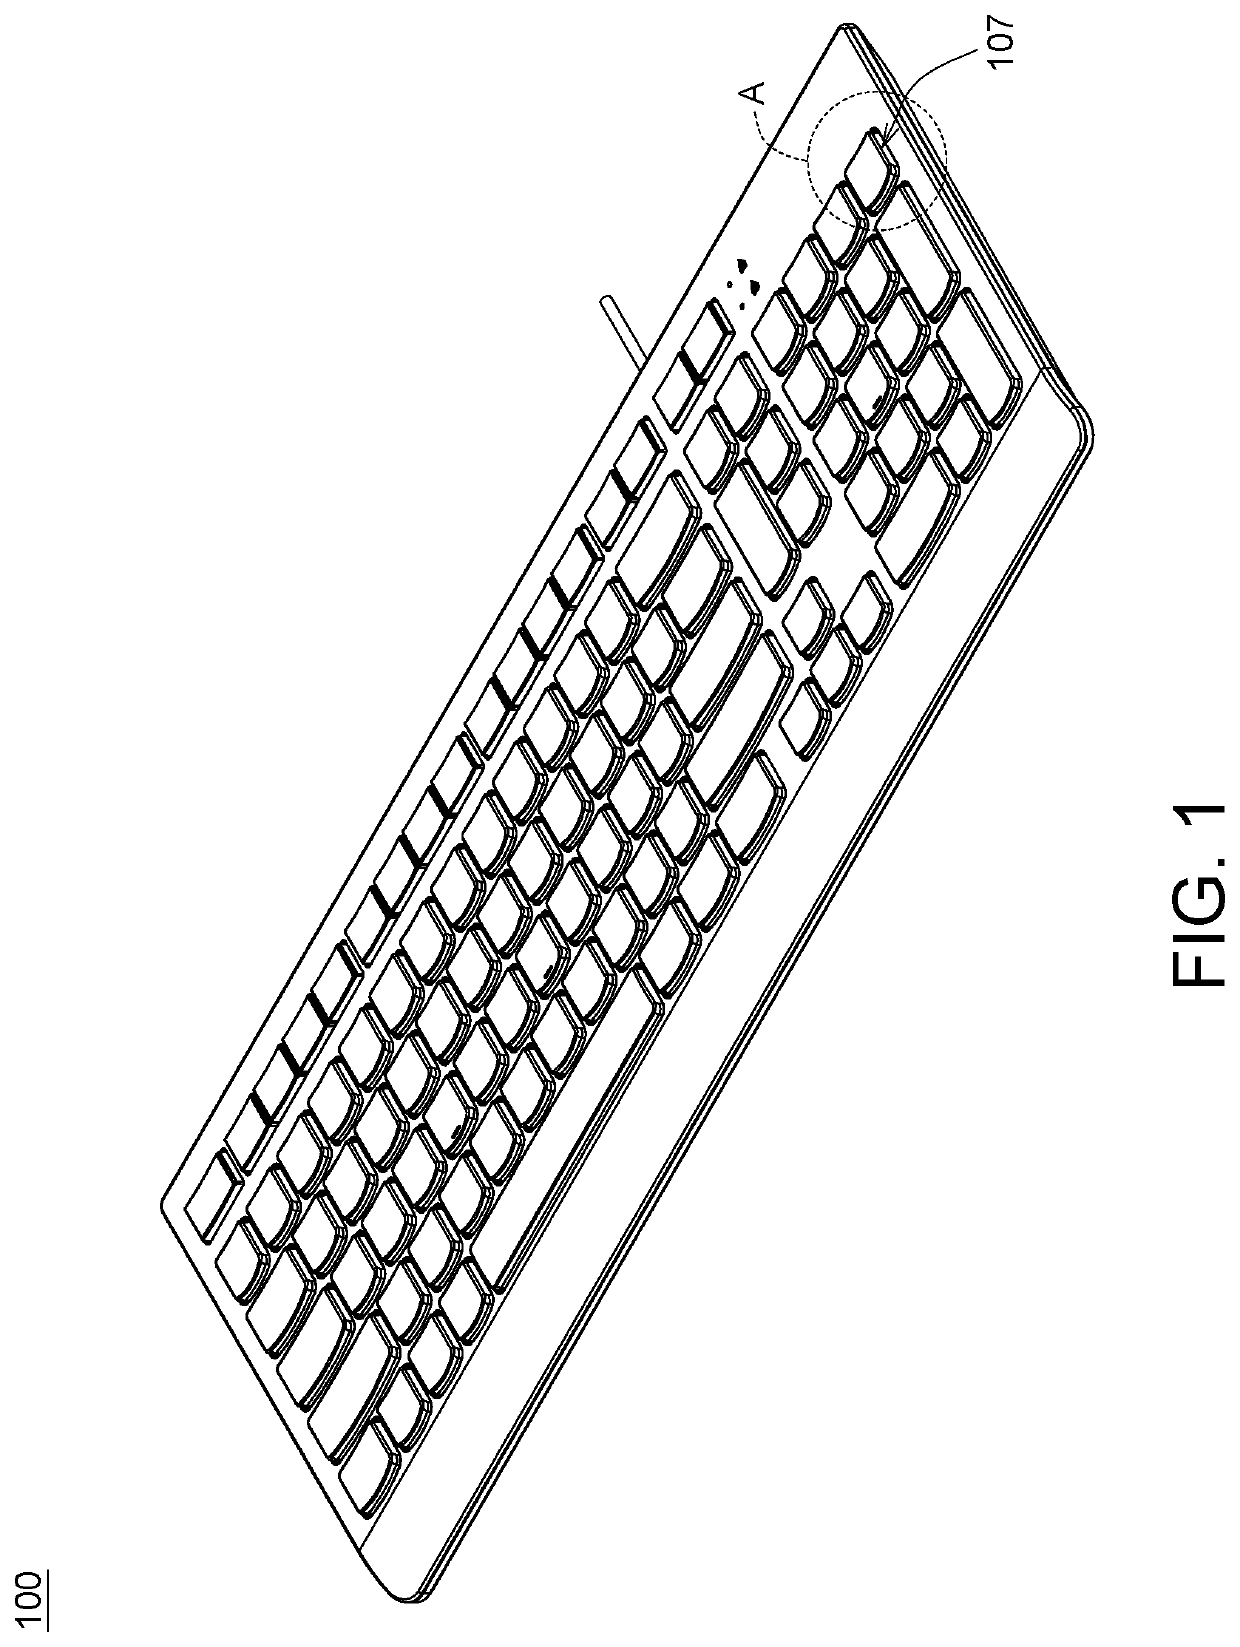 Keyboard structure